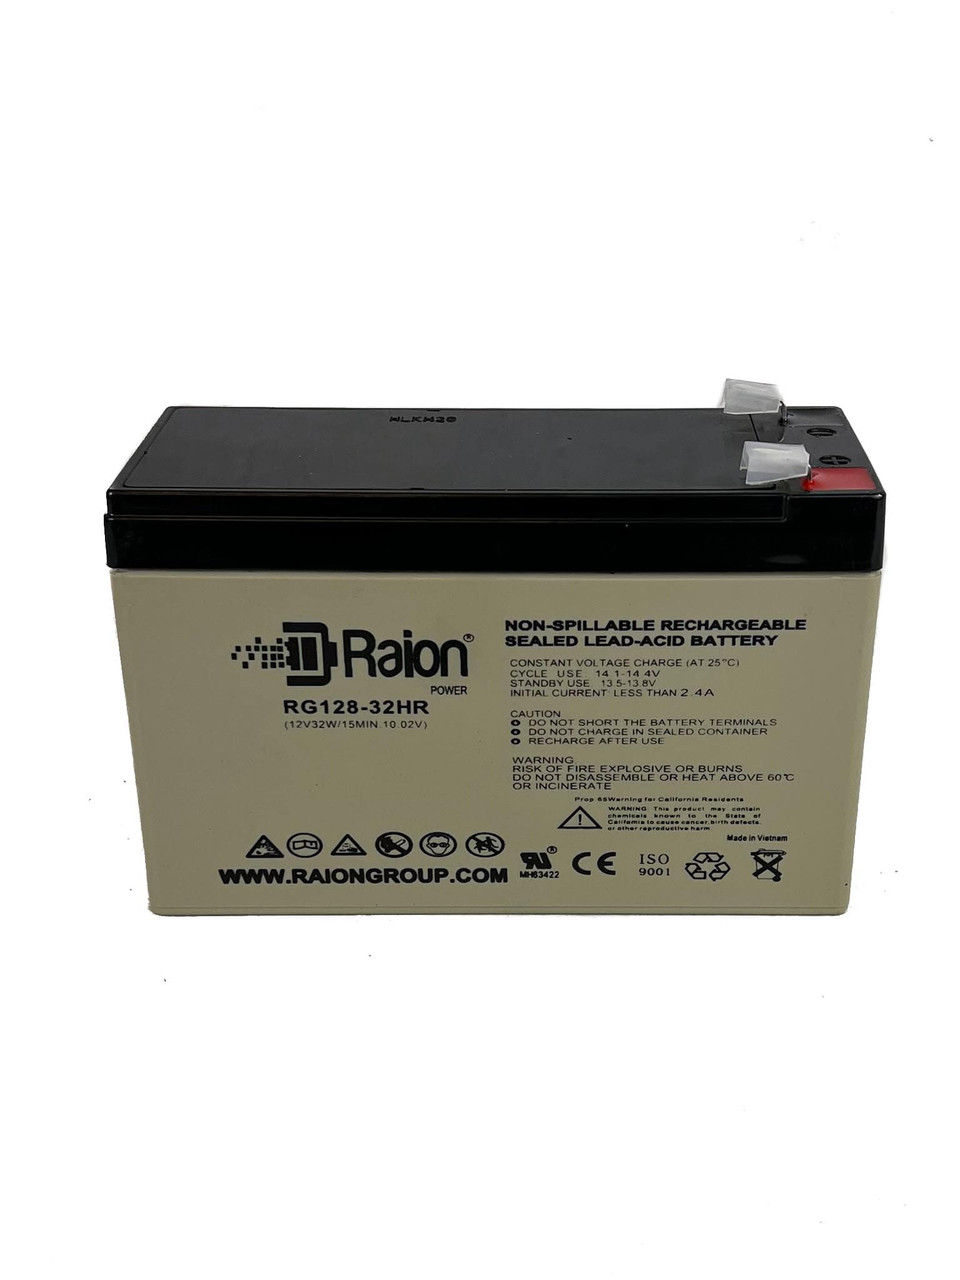 Raion Power RG128-32HR Replacement High Rate Battery Cartridge for Upsonic DS 600